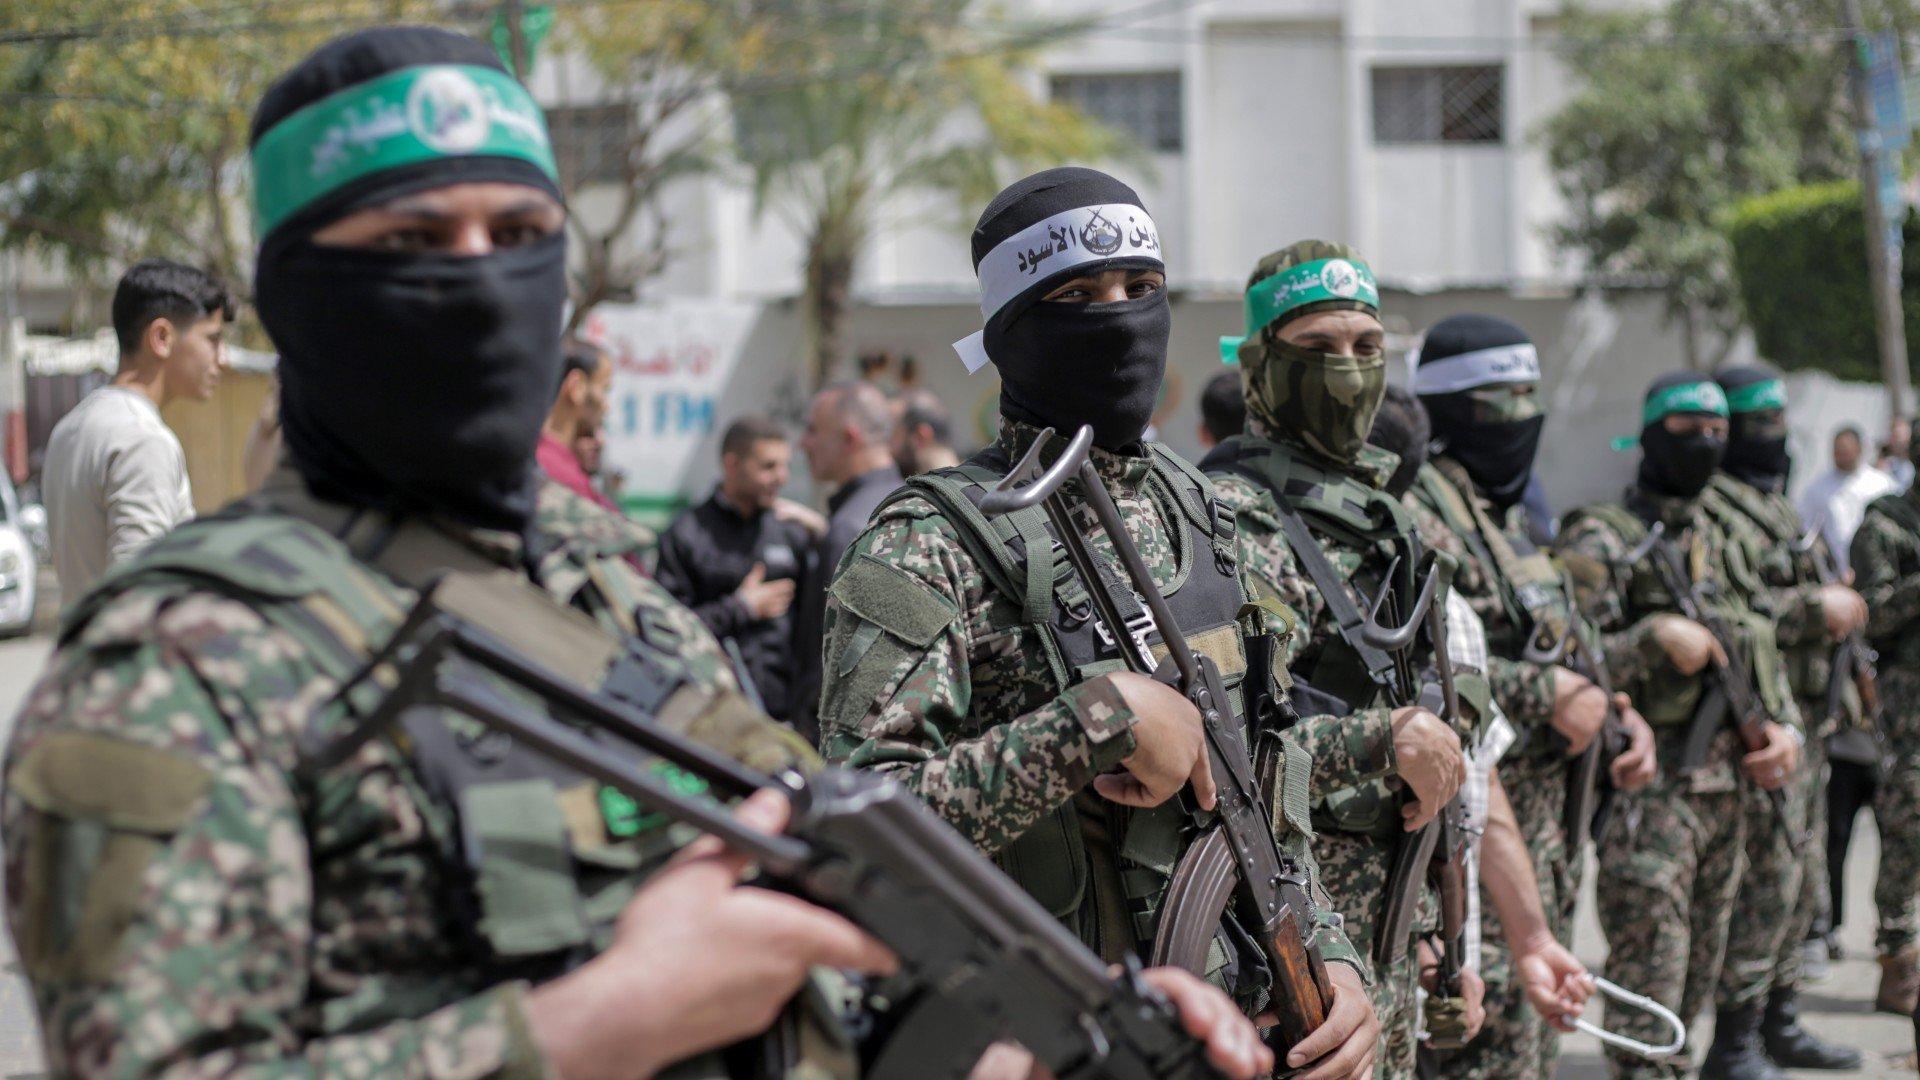 Masked members of the Hamas movement stand guard during a rally in solidarity with Jerusalem's Al-Aqsa Mosque, in Jabalia, in the northern Gaza Strip on 7 April (Reuters)